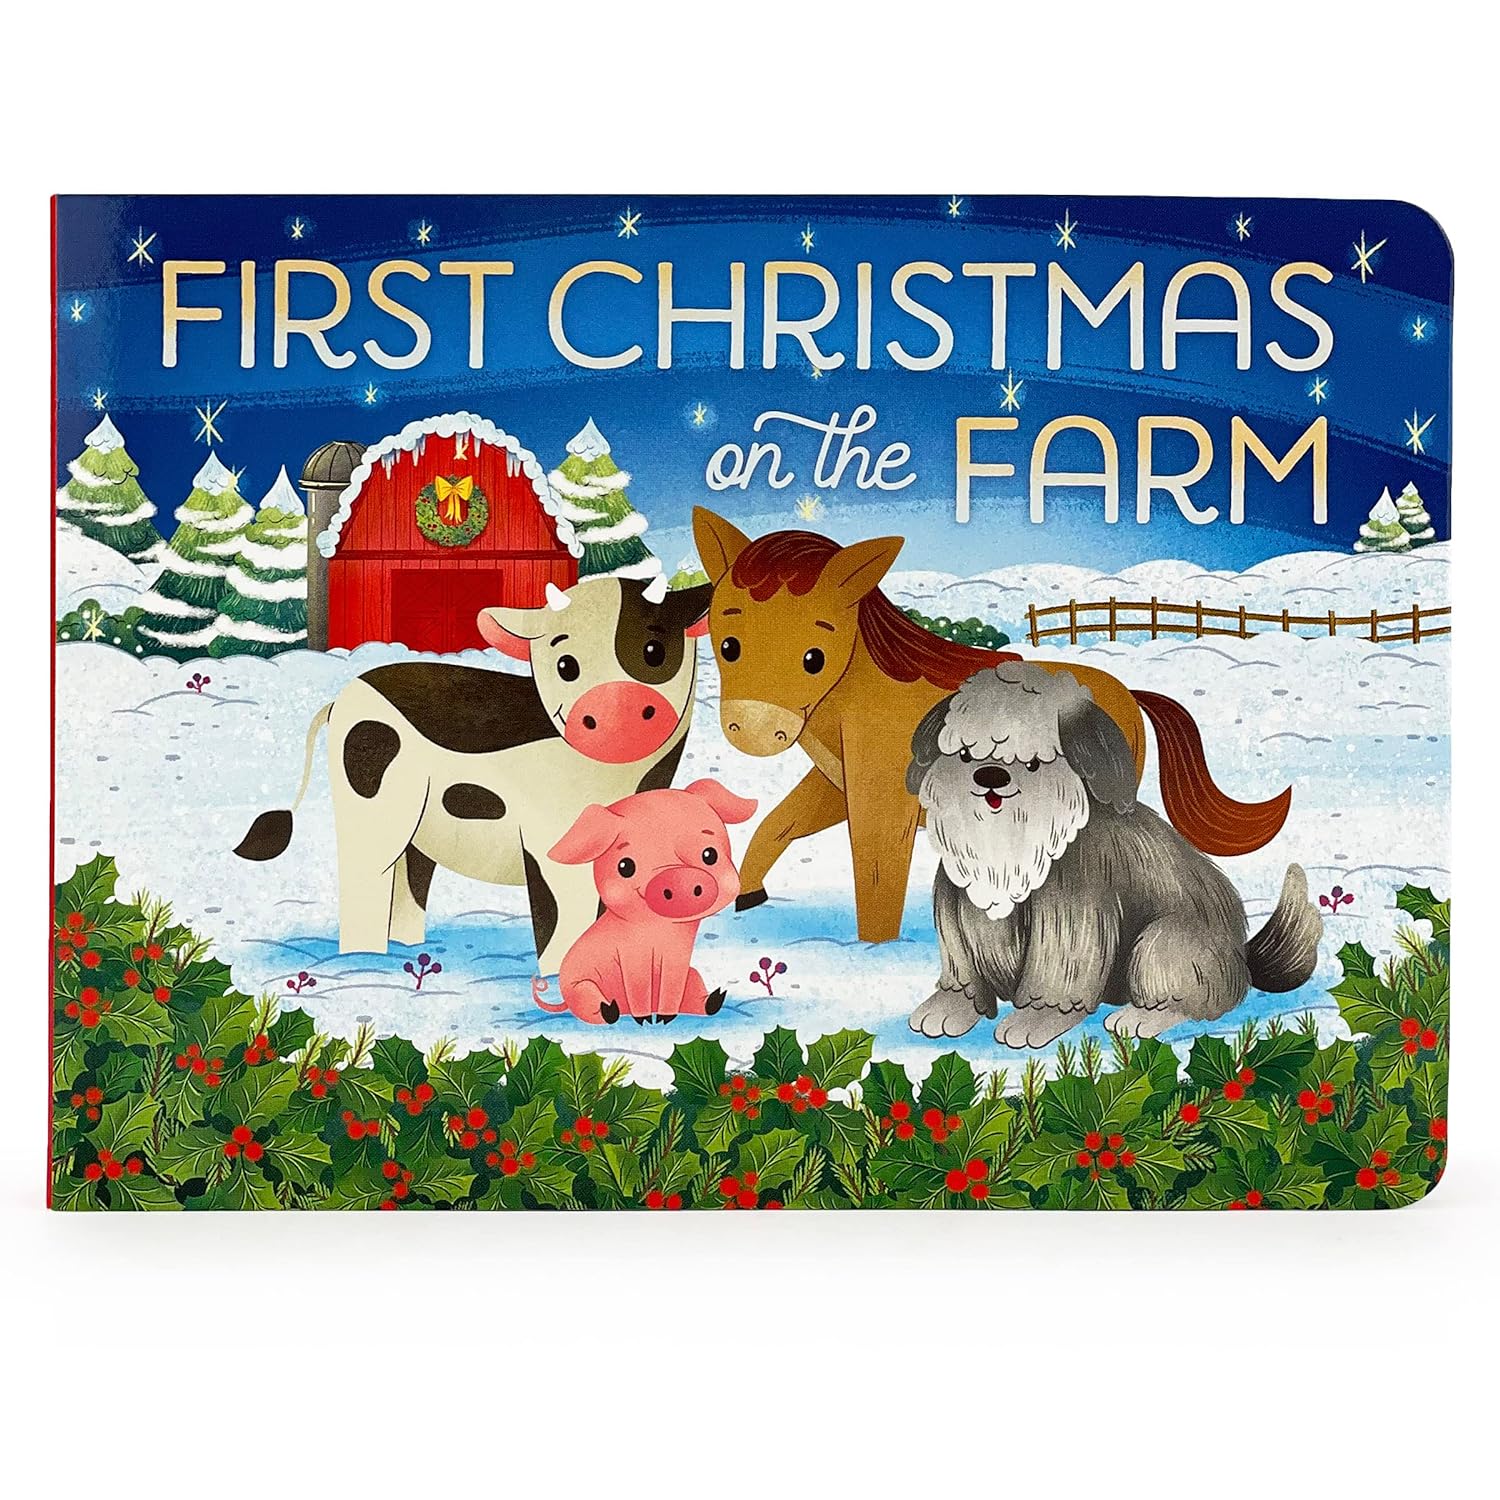 Cottage Door Press First Christmas on the Farm Holiday Board Book